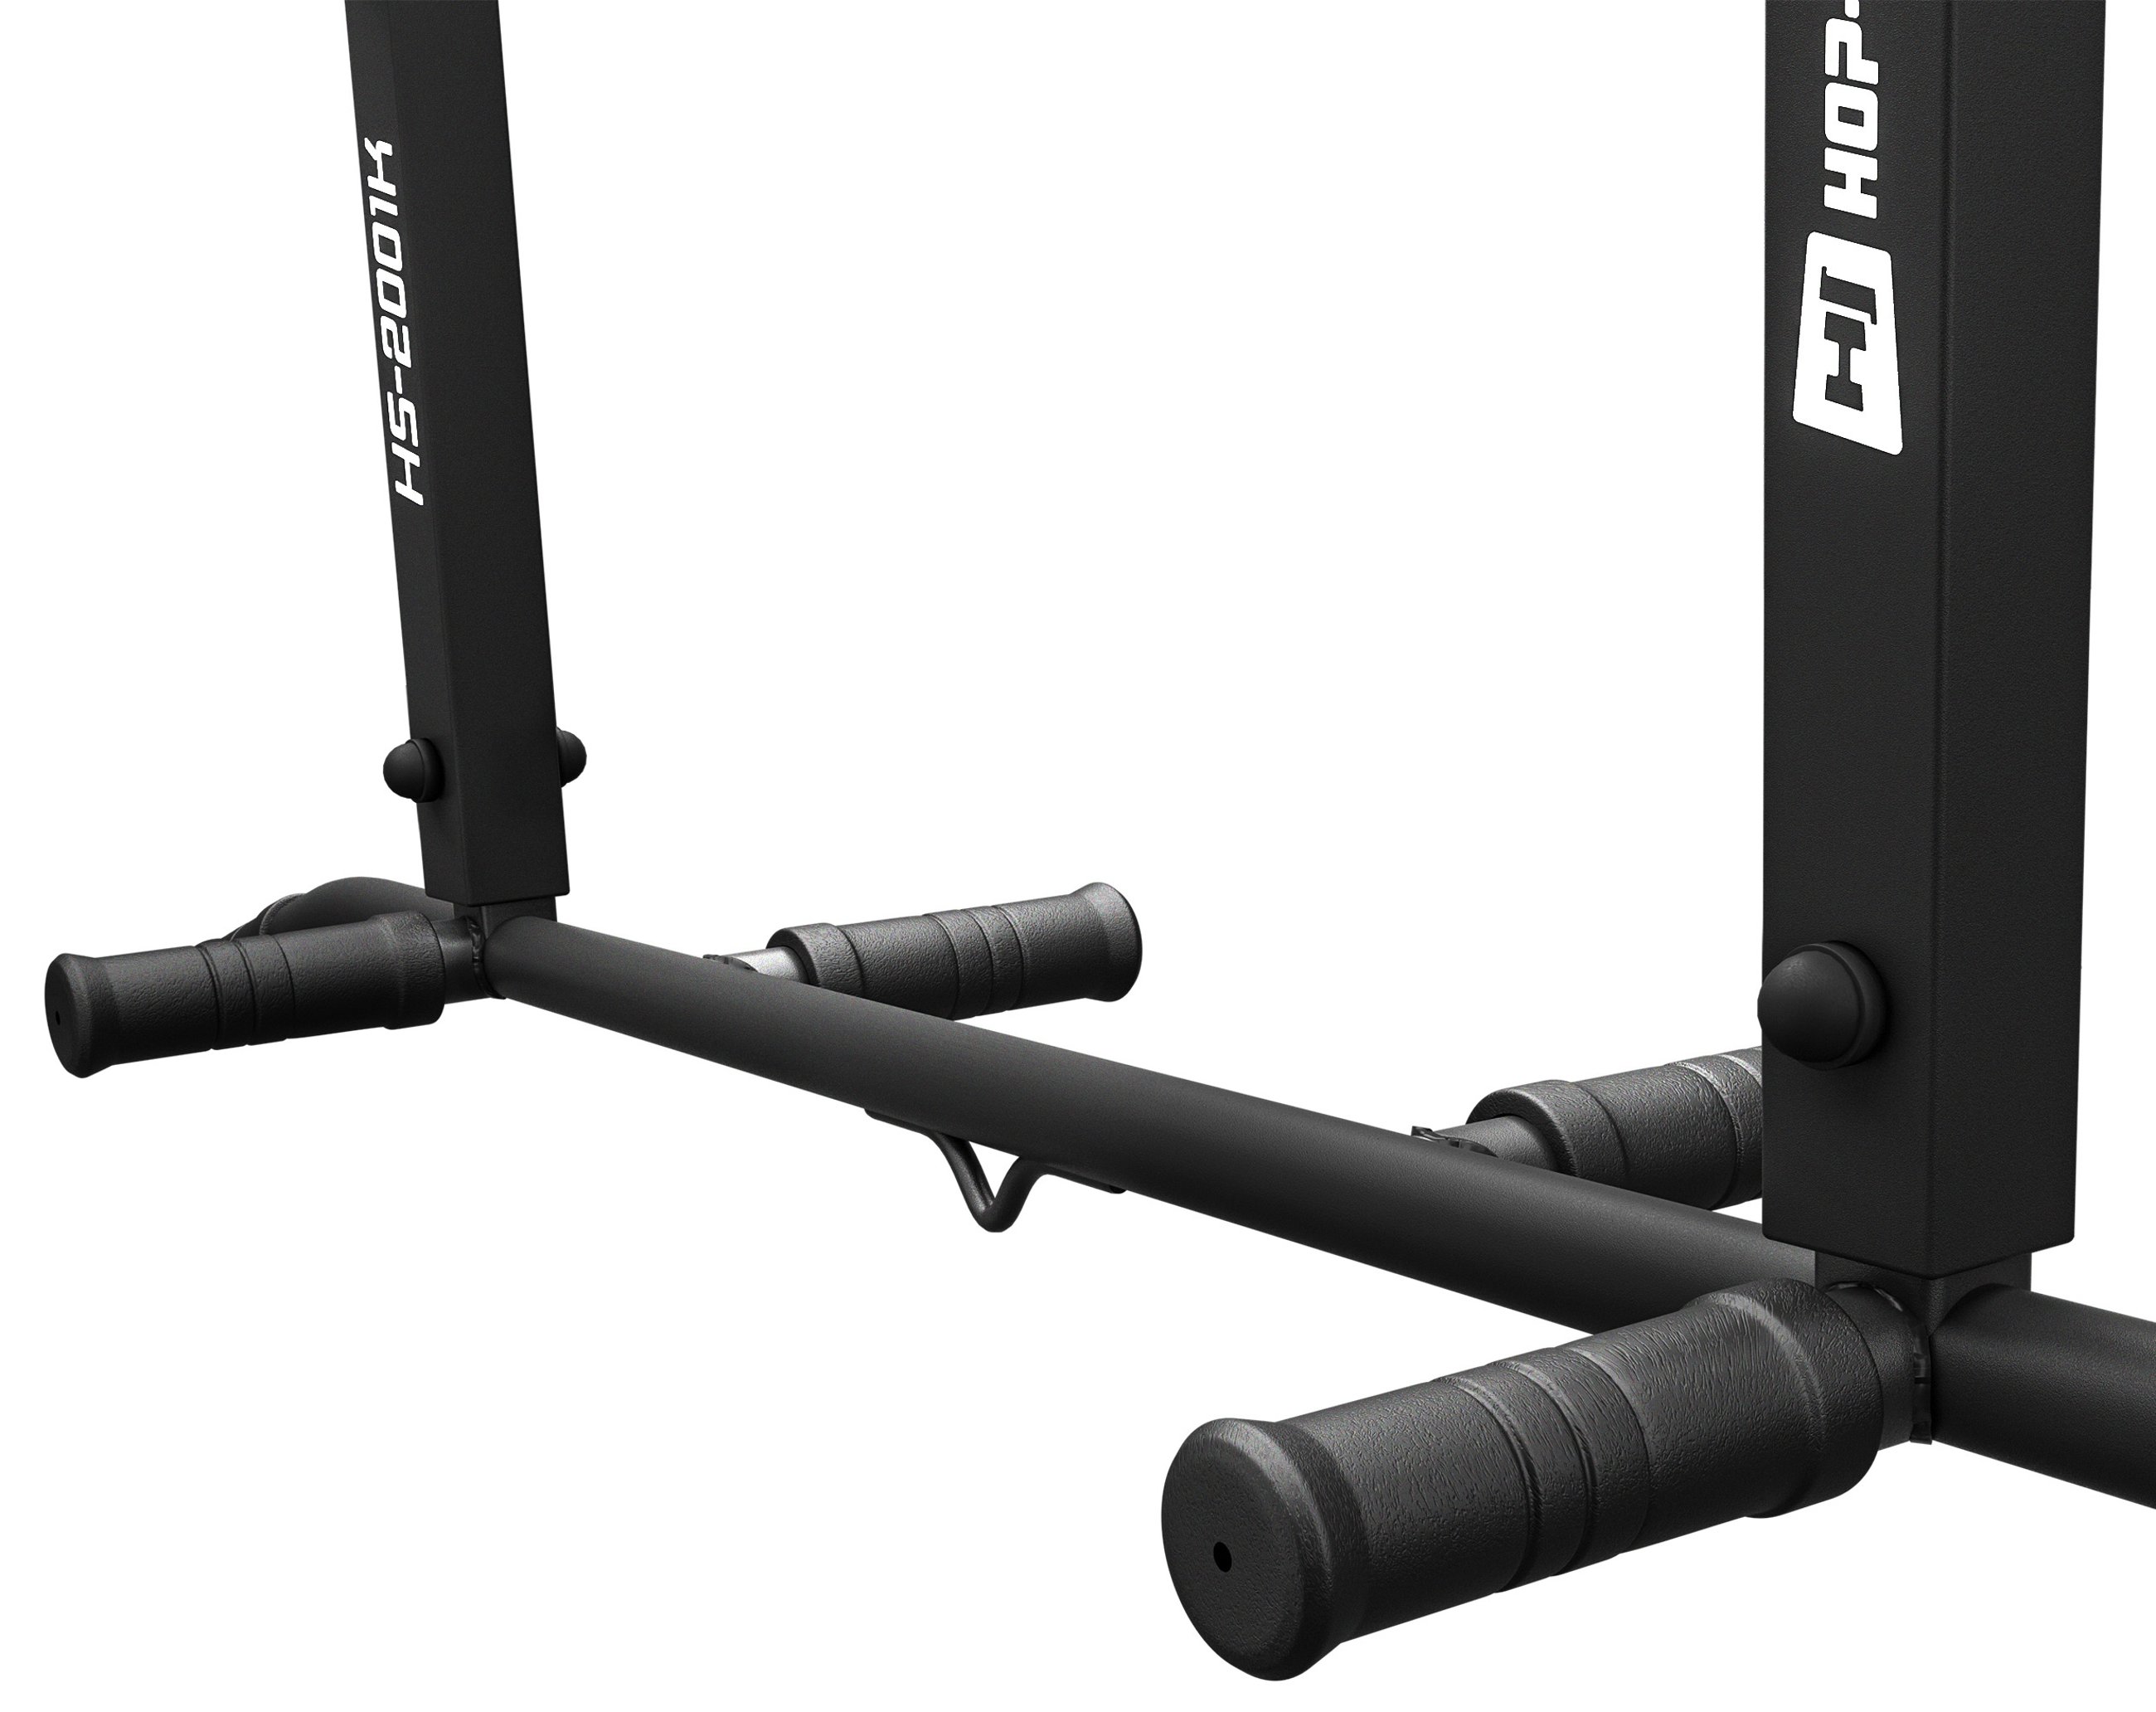 Ceiling Mounted Pull Up Bar HS-2001K